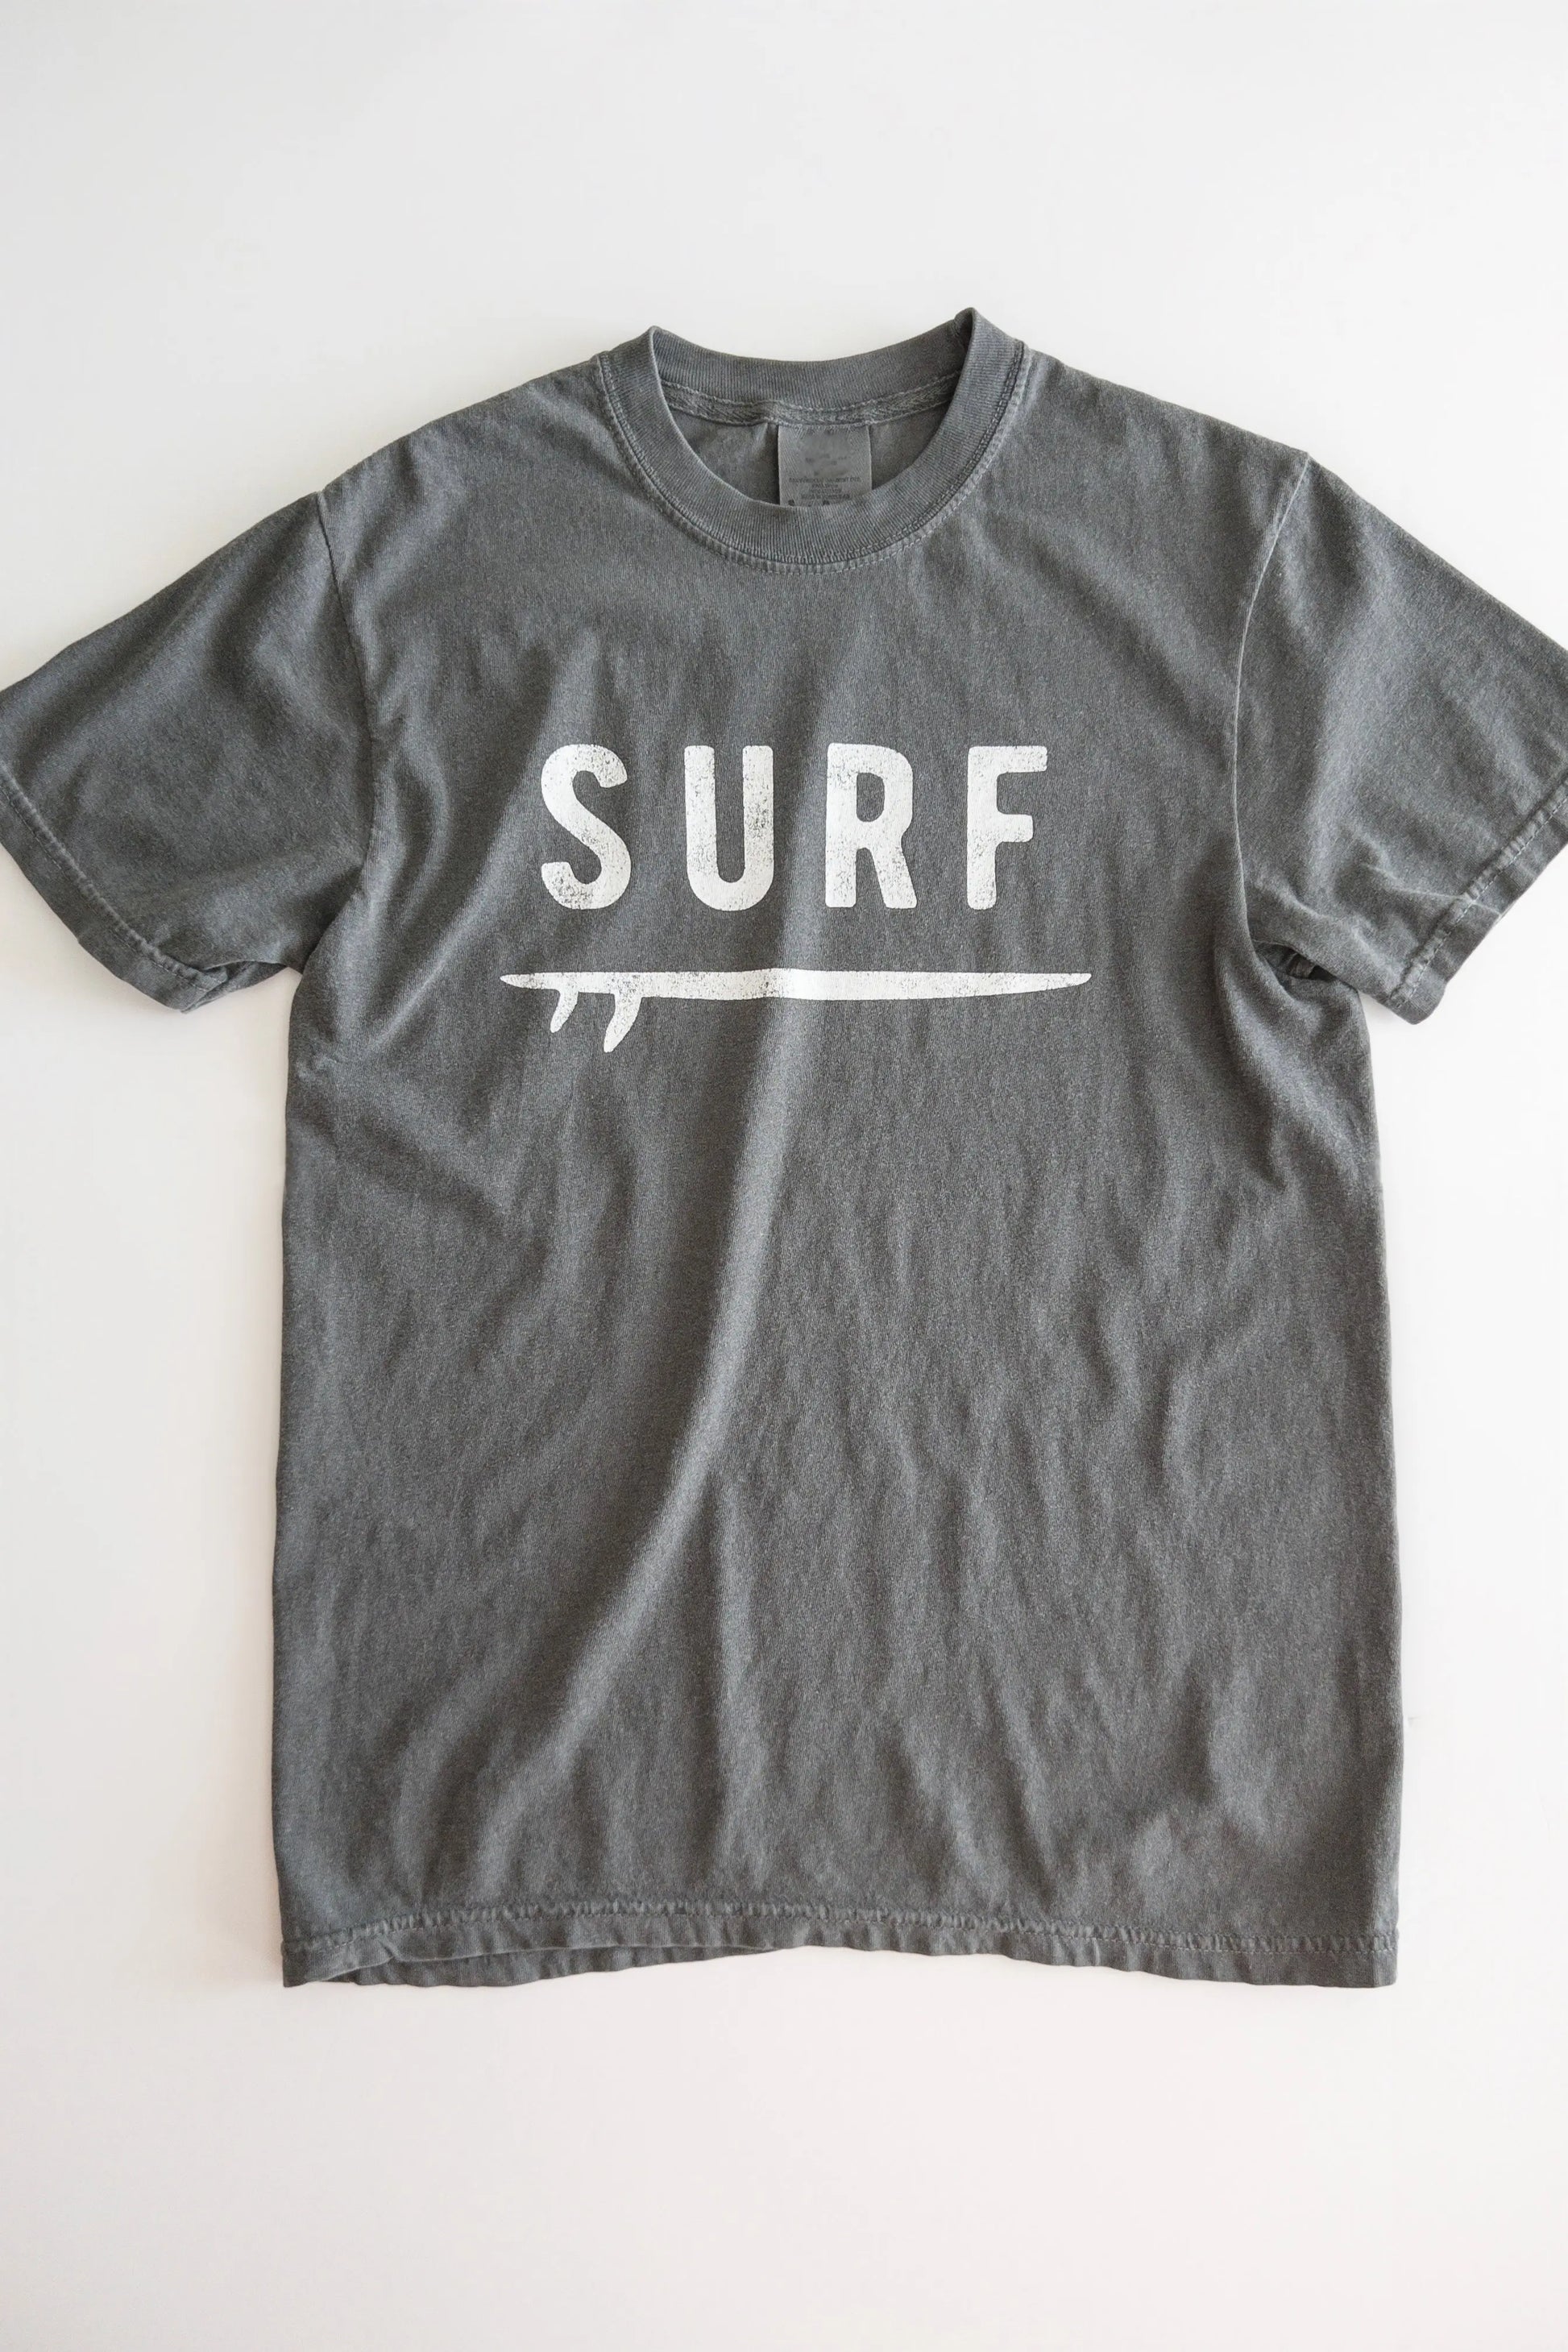 The Tiny Details SURF Vintage Graphic T-Shirt